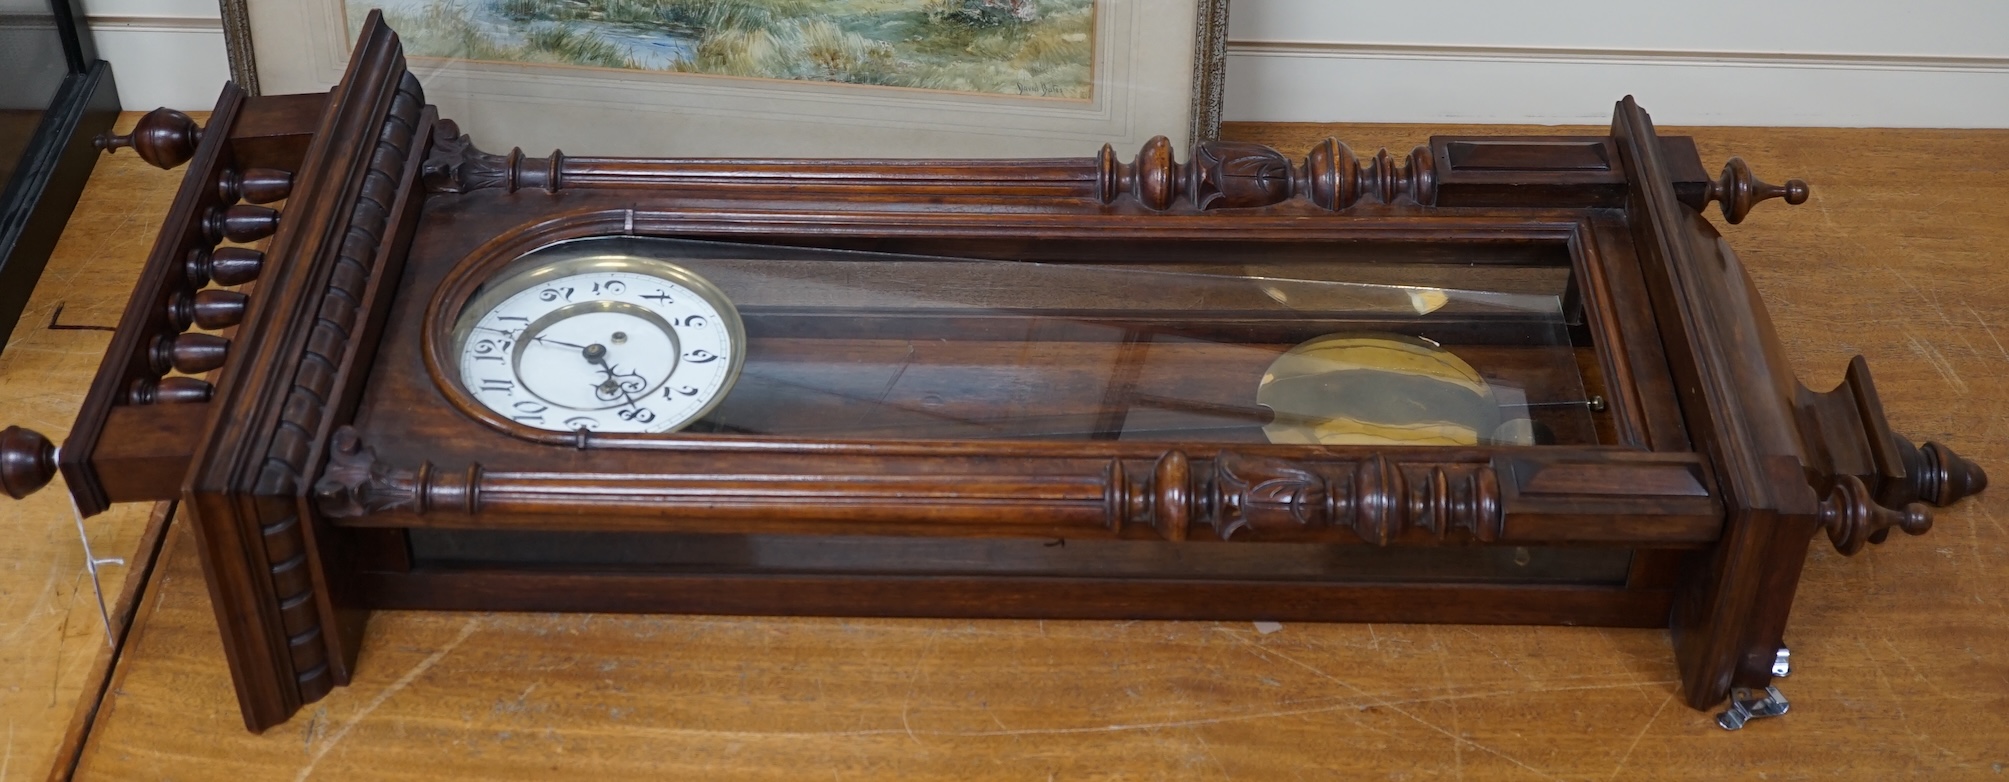 An early 20th century mahogany Vienna wall clock, 122cm. Condition - fair, glass loose, not tested as working